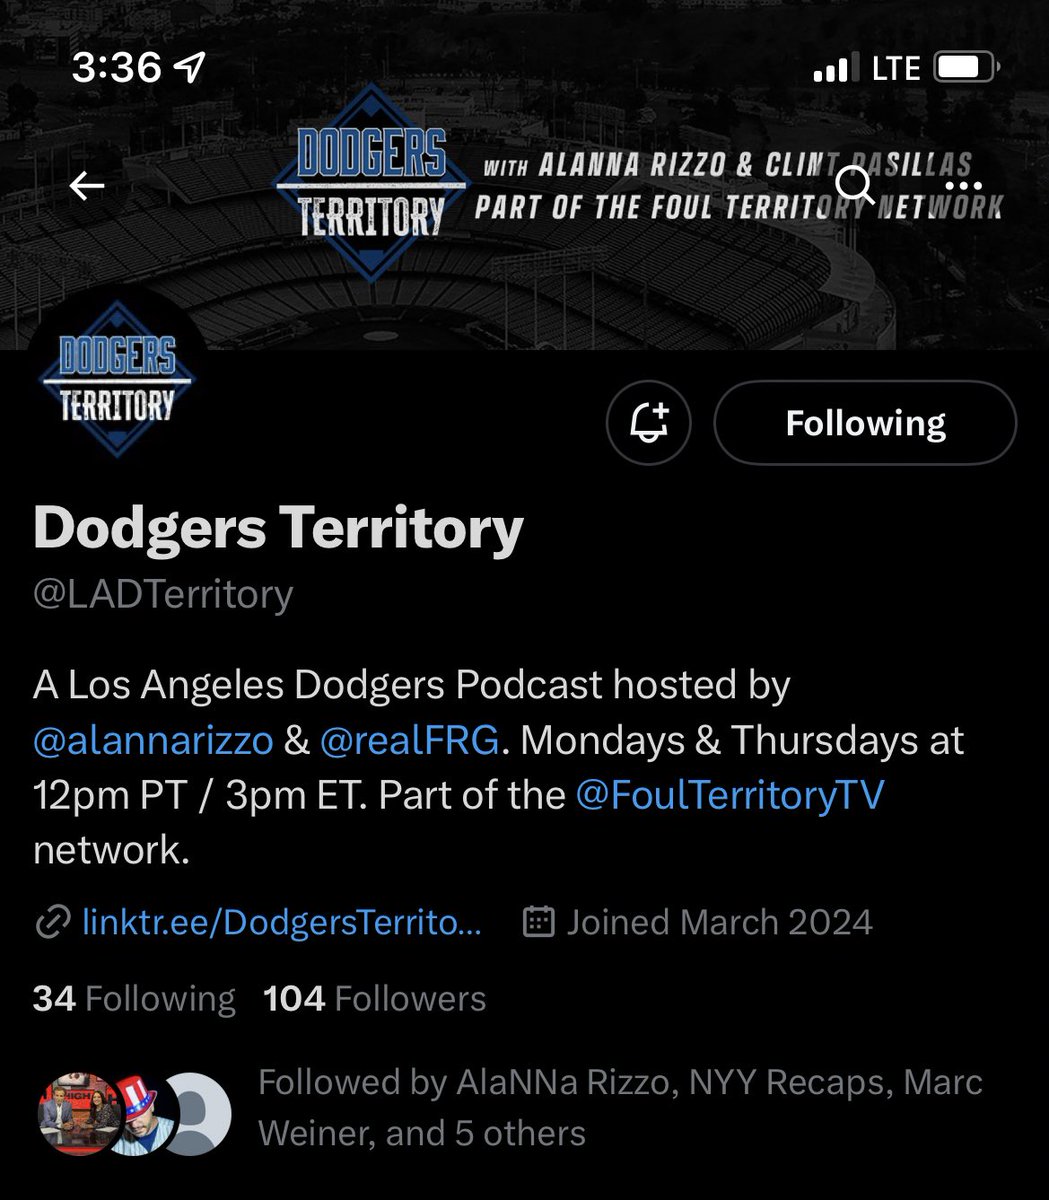 To all my Dodgers friends, give @LADTerritory a follow so you can say you were there before it took off. @RealFRG and @AlannaRizzo are great, despite their efforts to try and convert me into a Dodgers fan.